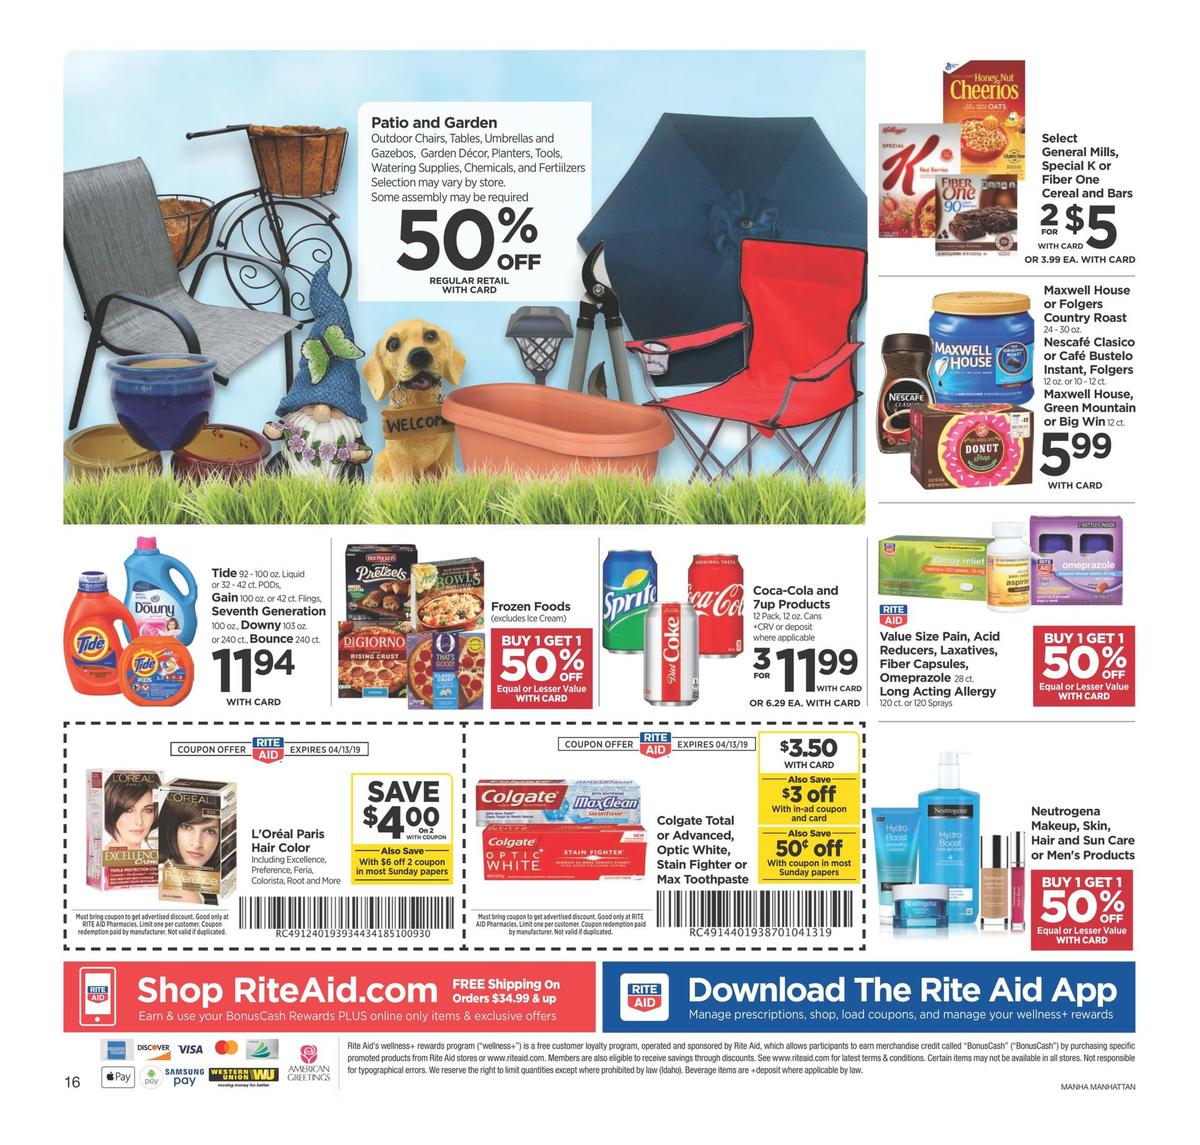 Rite Aid Weekly Ad from April 7